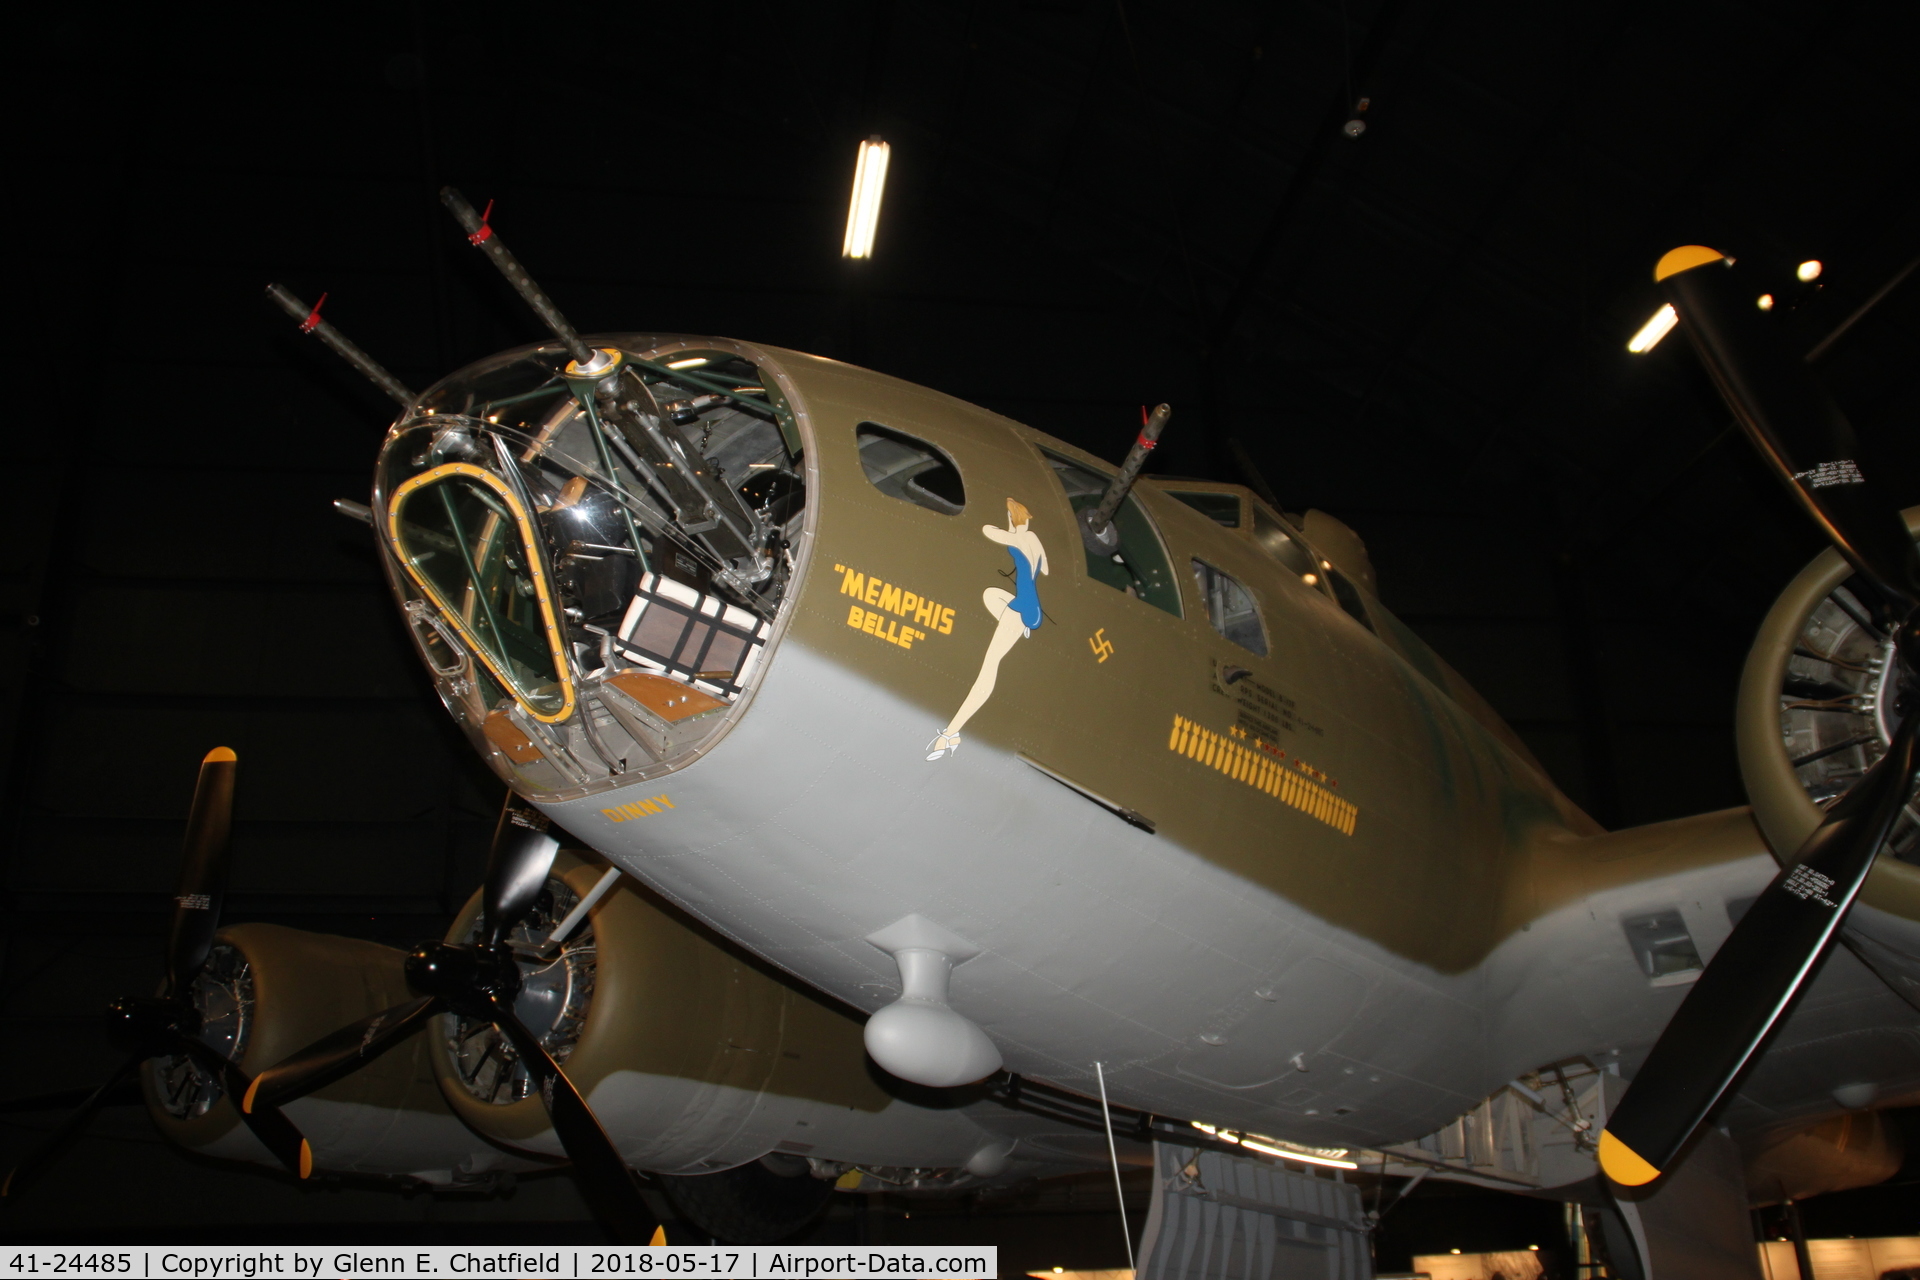 41-24485, 1941 Boeing B-17F-10-BO Flying Fortress (299P) C/N 3170, Fully restored and open for public display on 5/17/18